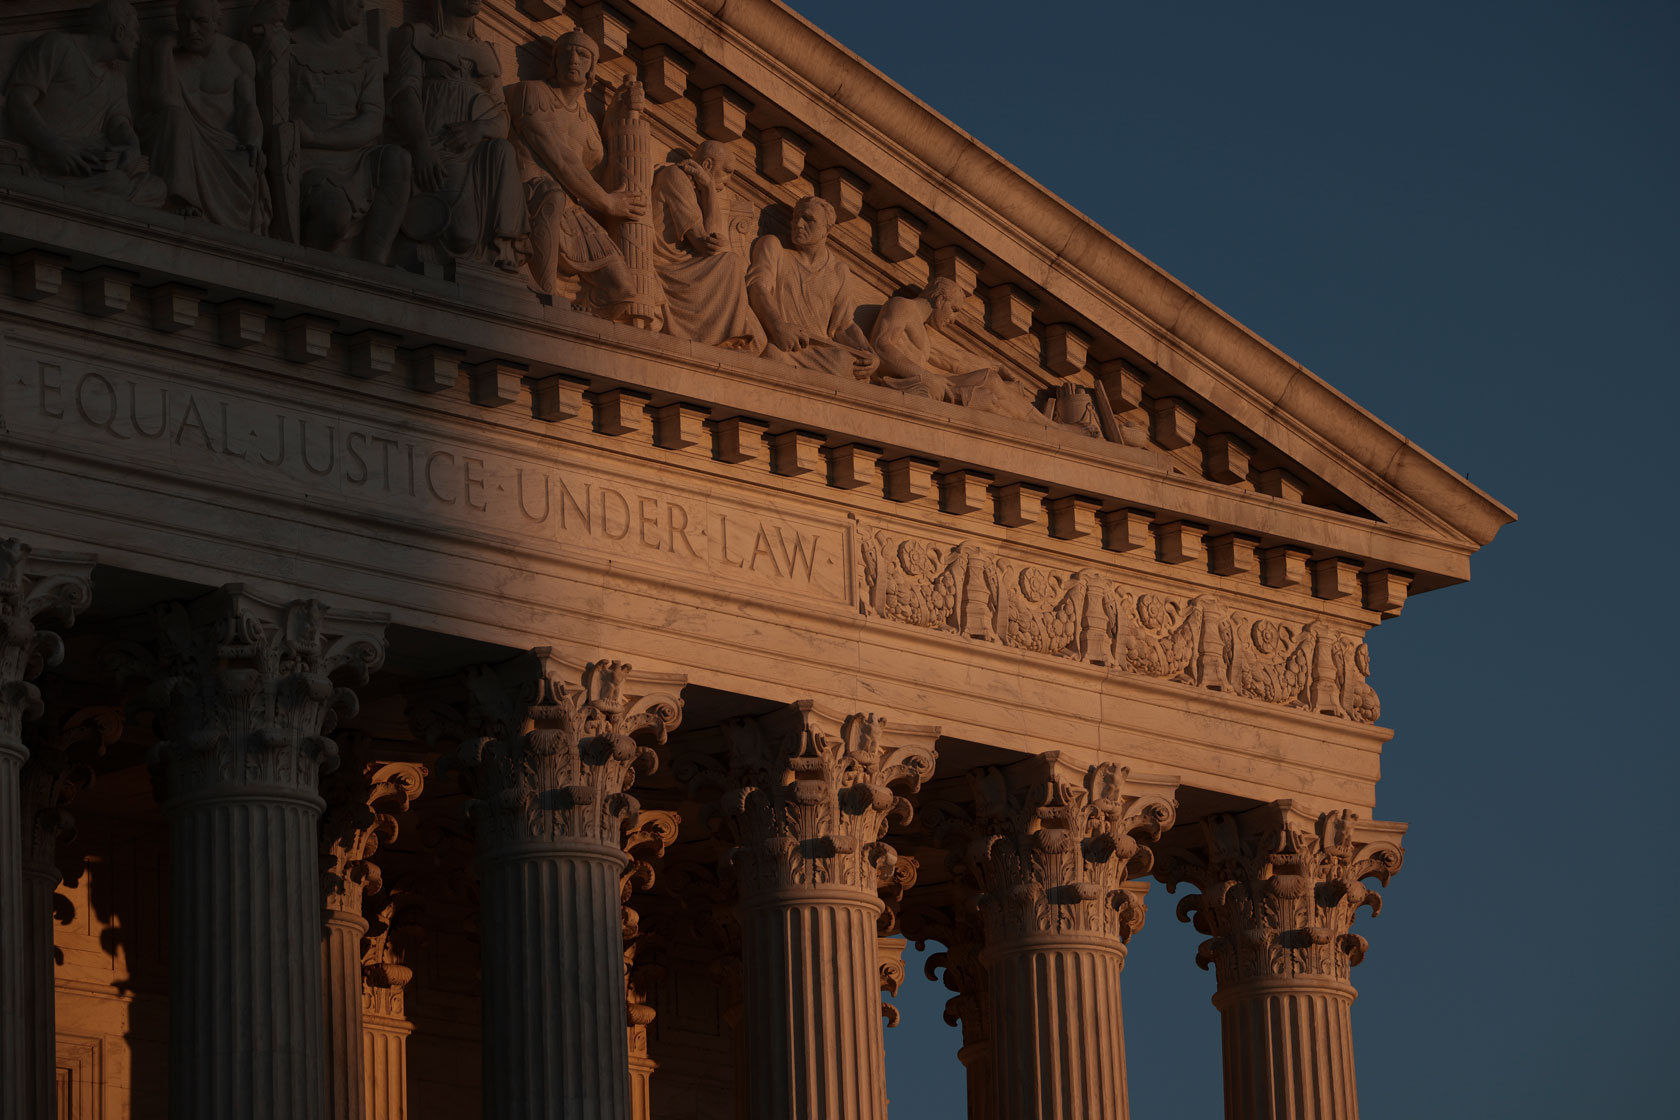 Photo shows a close-up shot of the top of the U.S. Supreme Court building with the sunset light hitting it, against a blue sky.